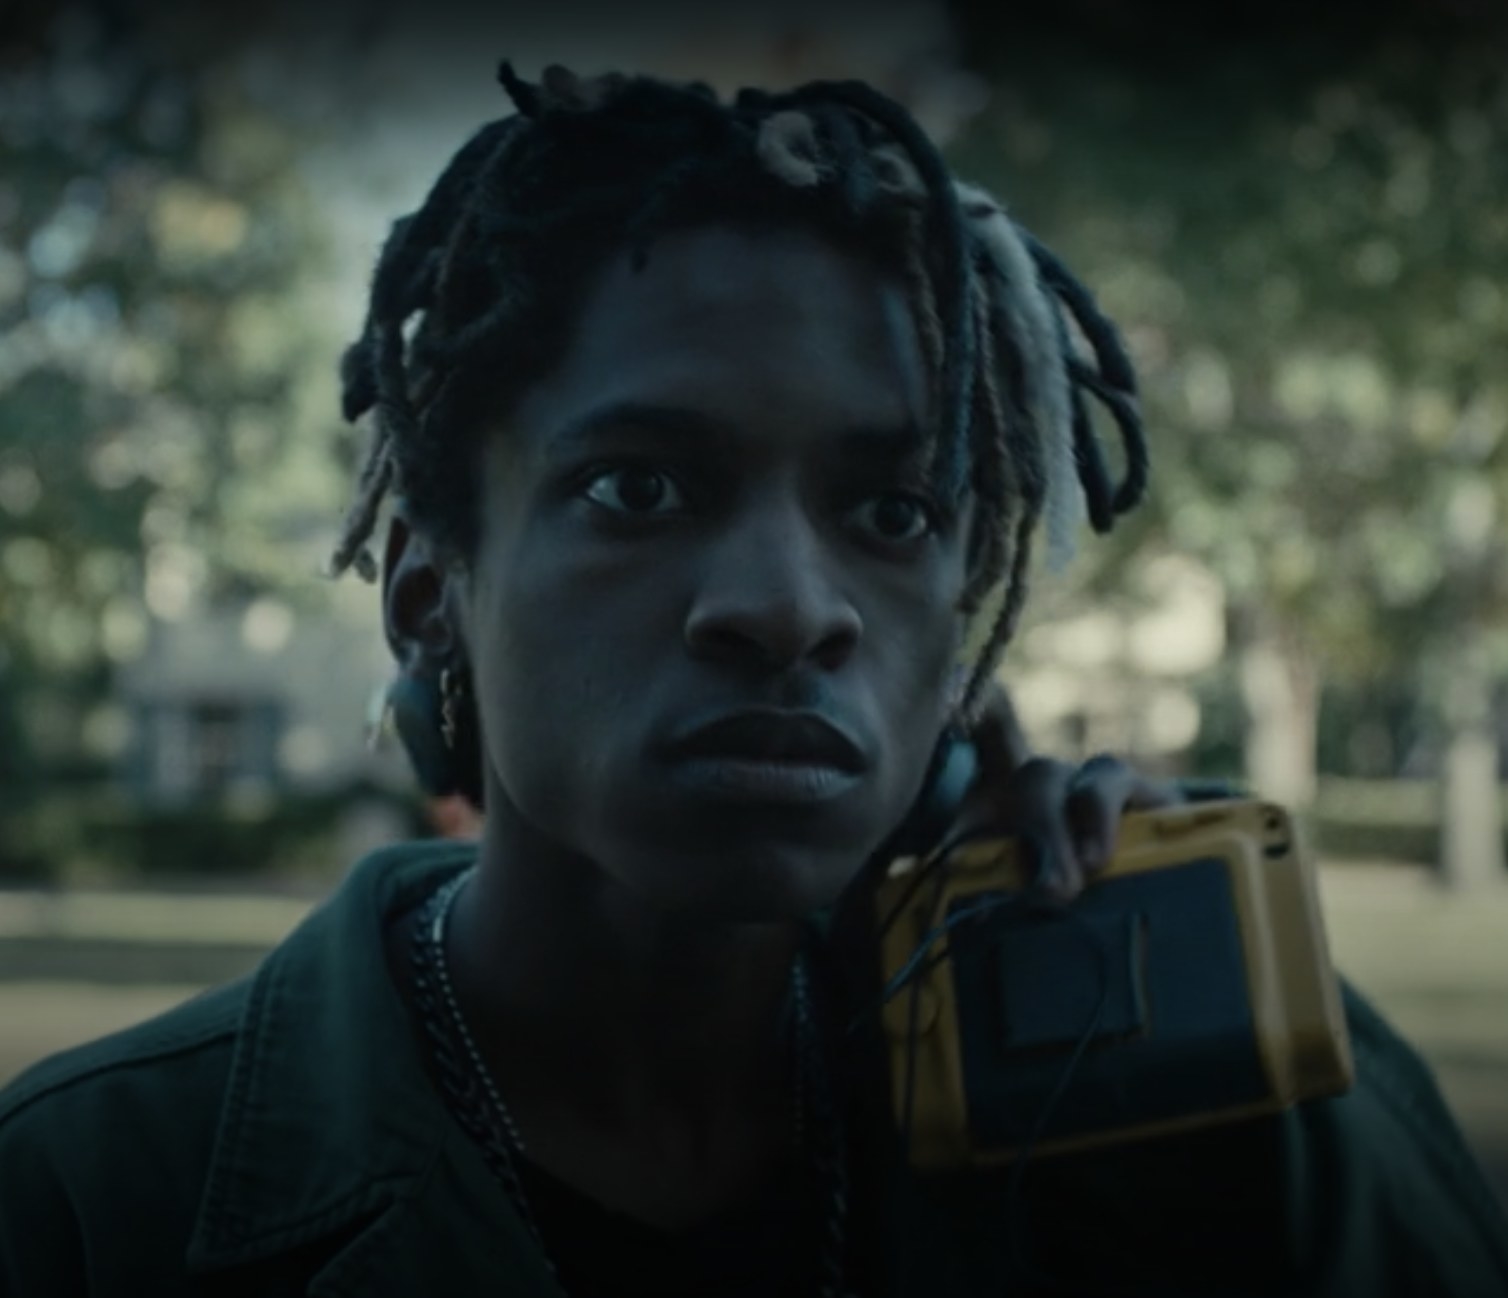 A teenager with short dreads wearing headphones and holding a yellow cassette walkman.